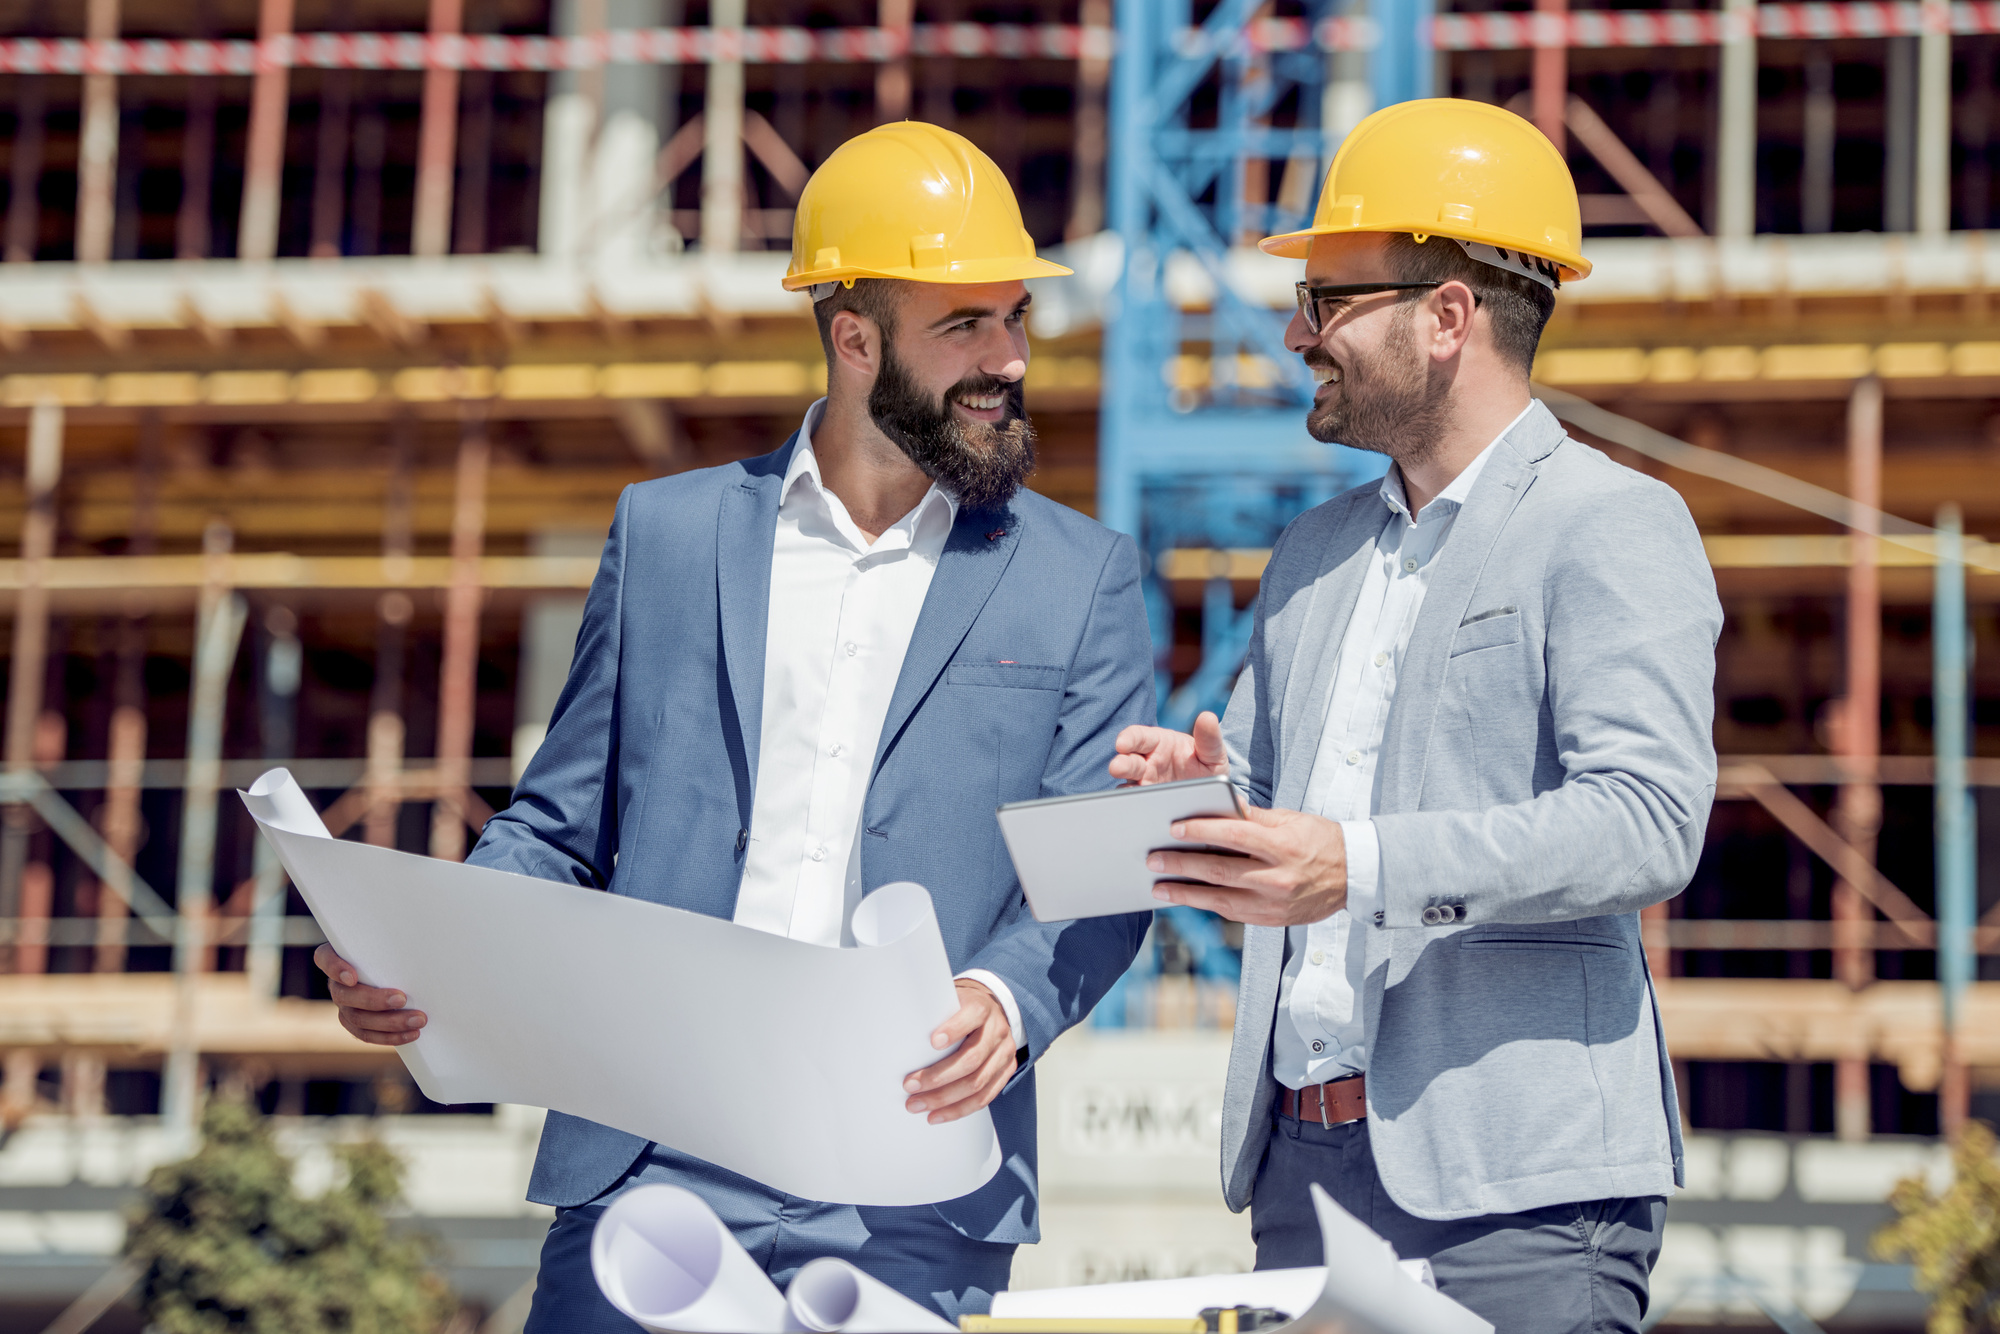 Do you need to hire a general contractor to work on your home? Here are 5 questions to ask the best construction company before hiring them.